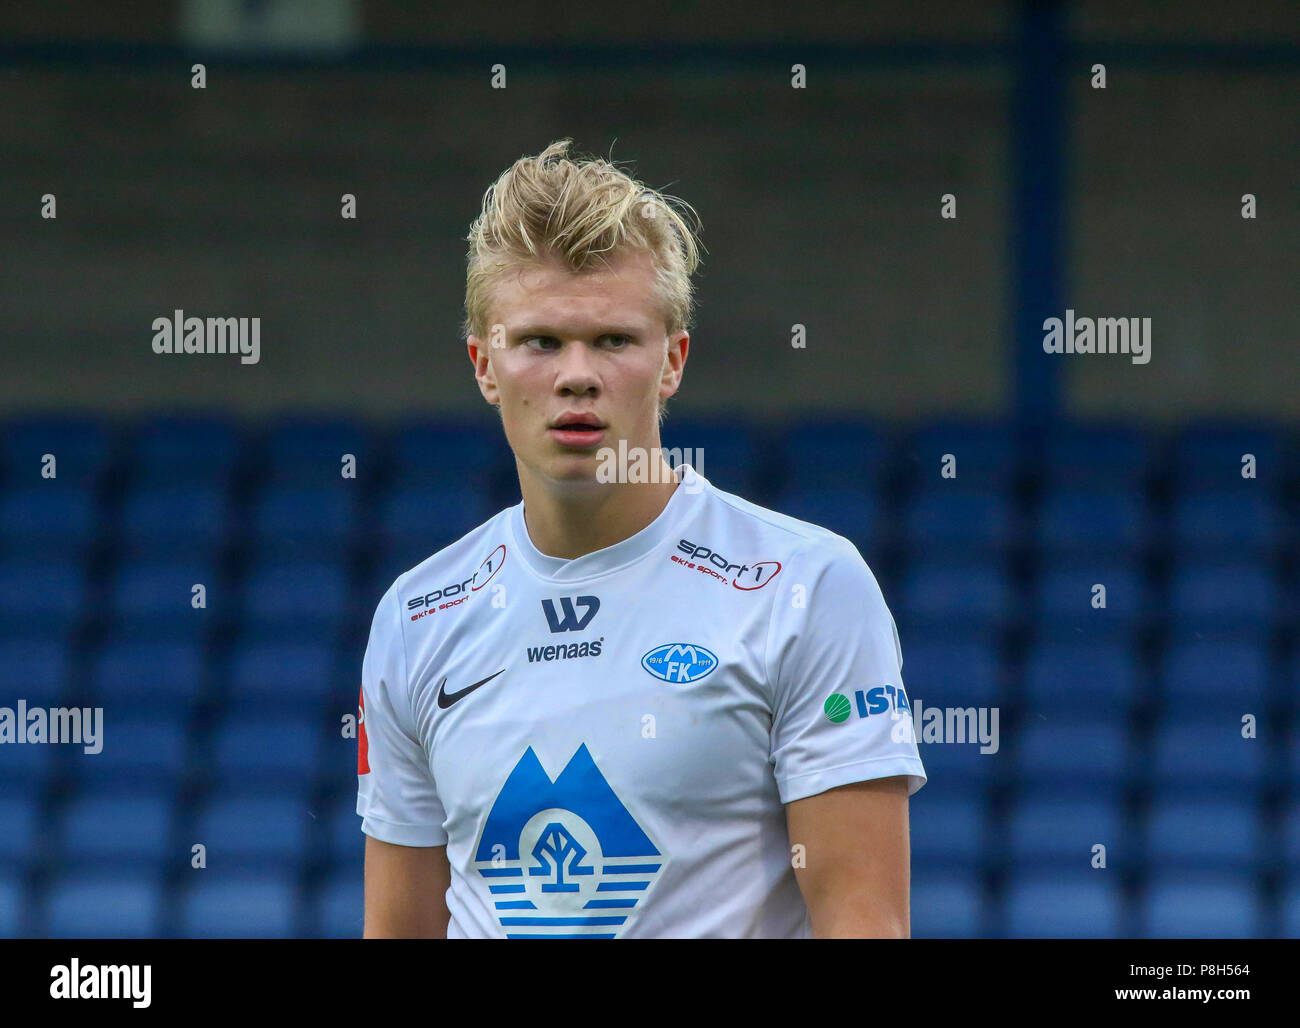 Mourneview Park, Lurgan, Northern Ireland. 11 July 2018. UEFA Europa League (First Qualifying Round), Glenavon v Molde. Molde's Erling Braut Haland in action at Mourneview Park. Credit: David Hunter/Alamy Live News. Stock Photo